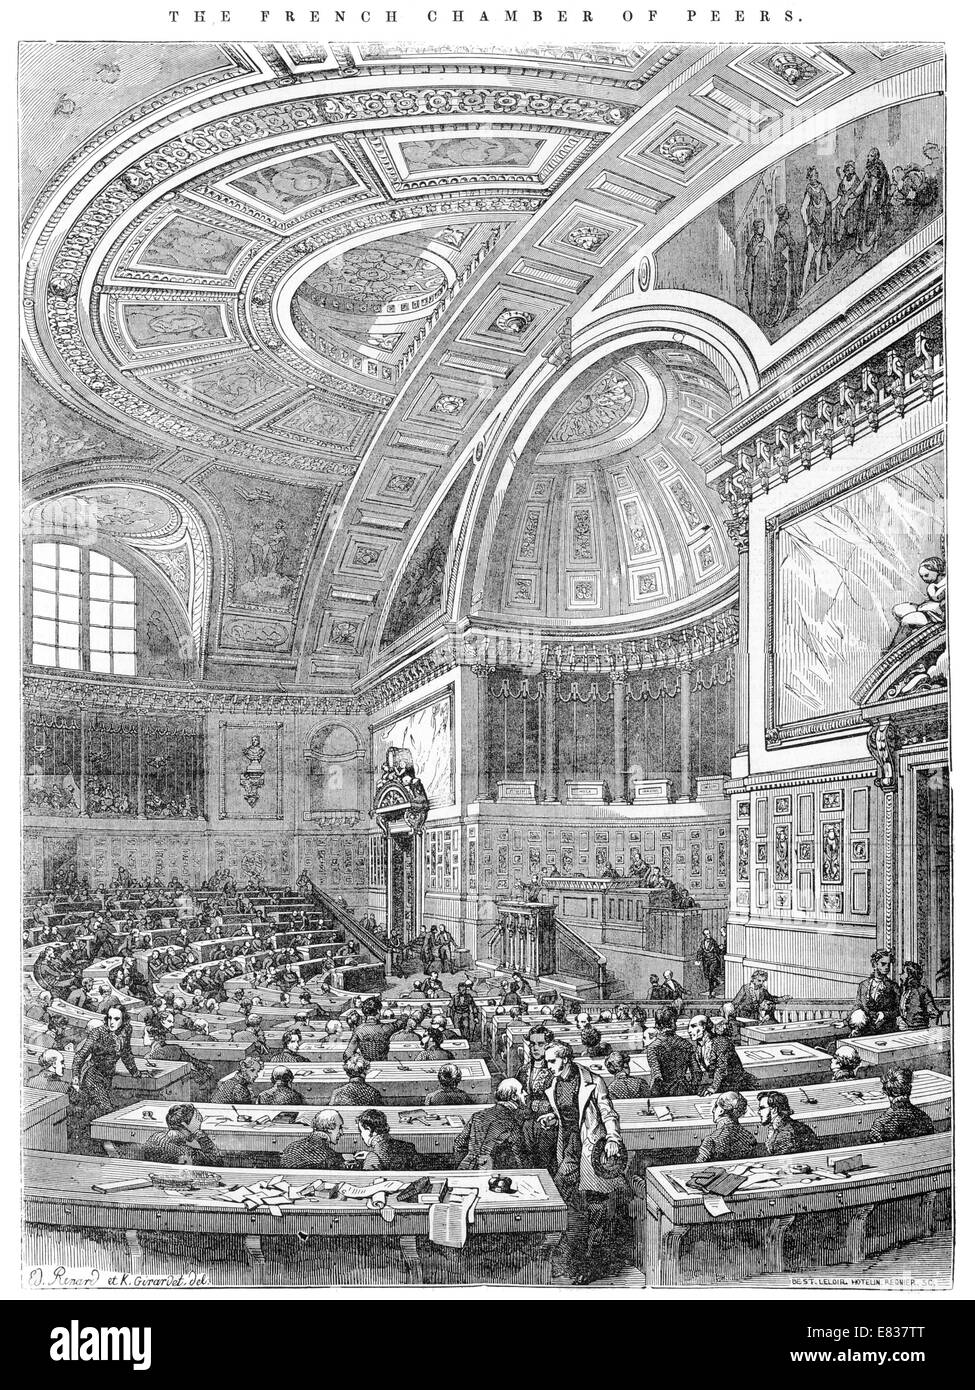 French Chamber of Peers Chambre des Paris 1844 parliament Stock Photo